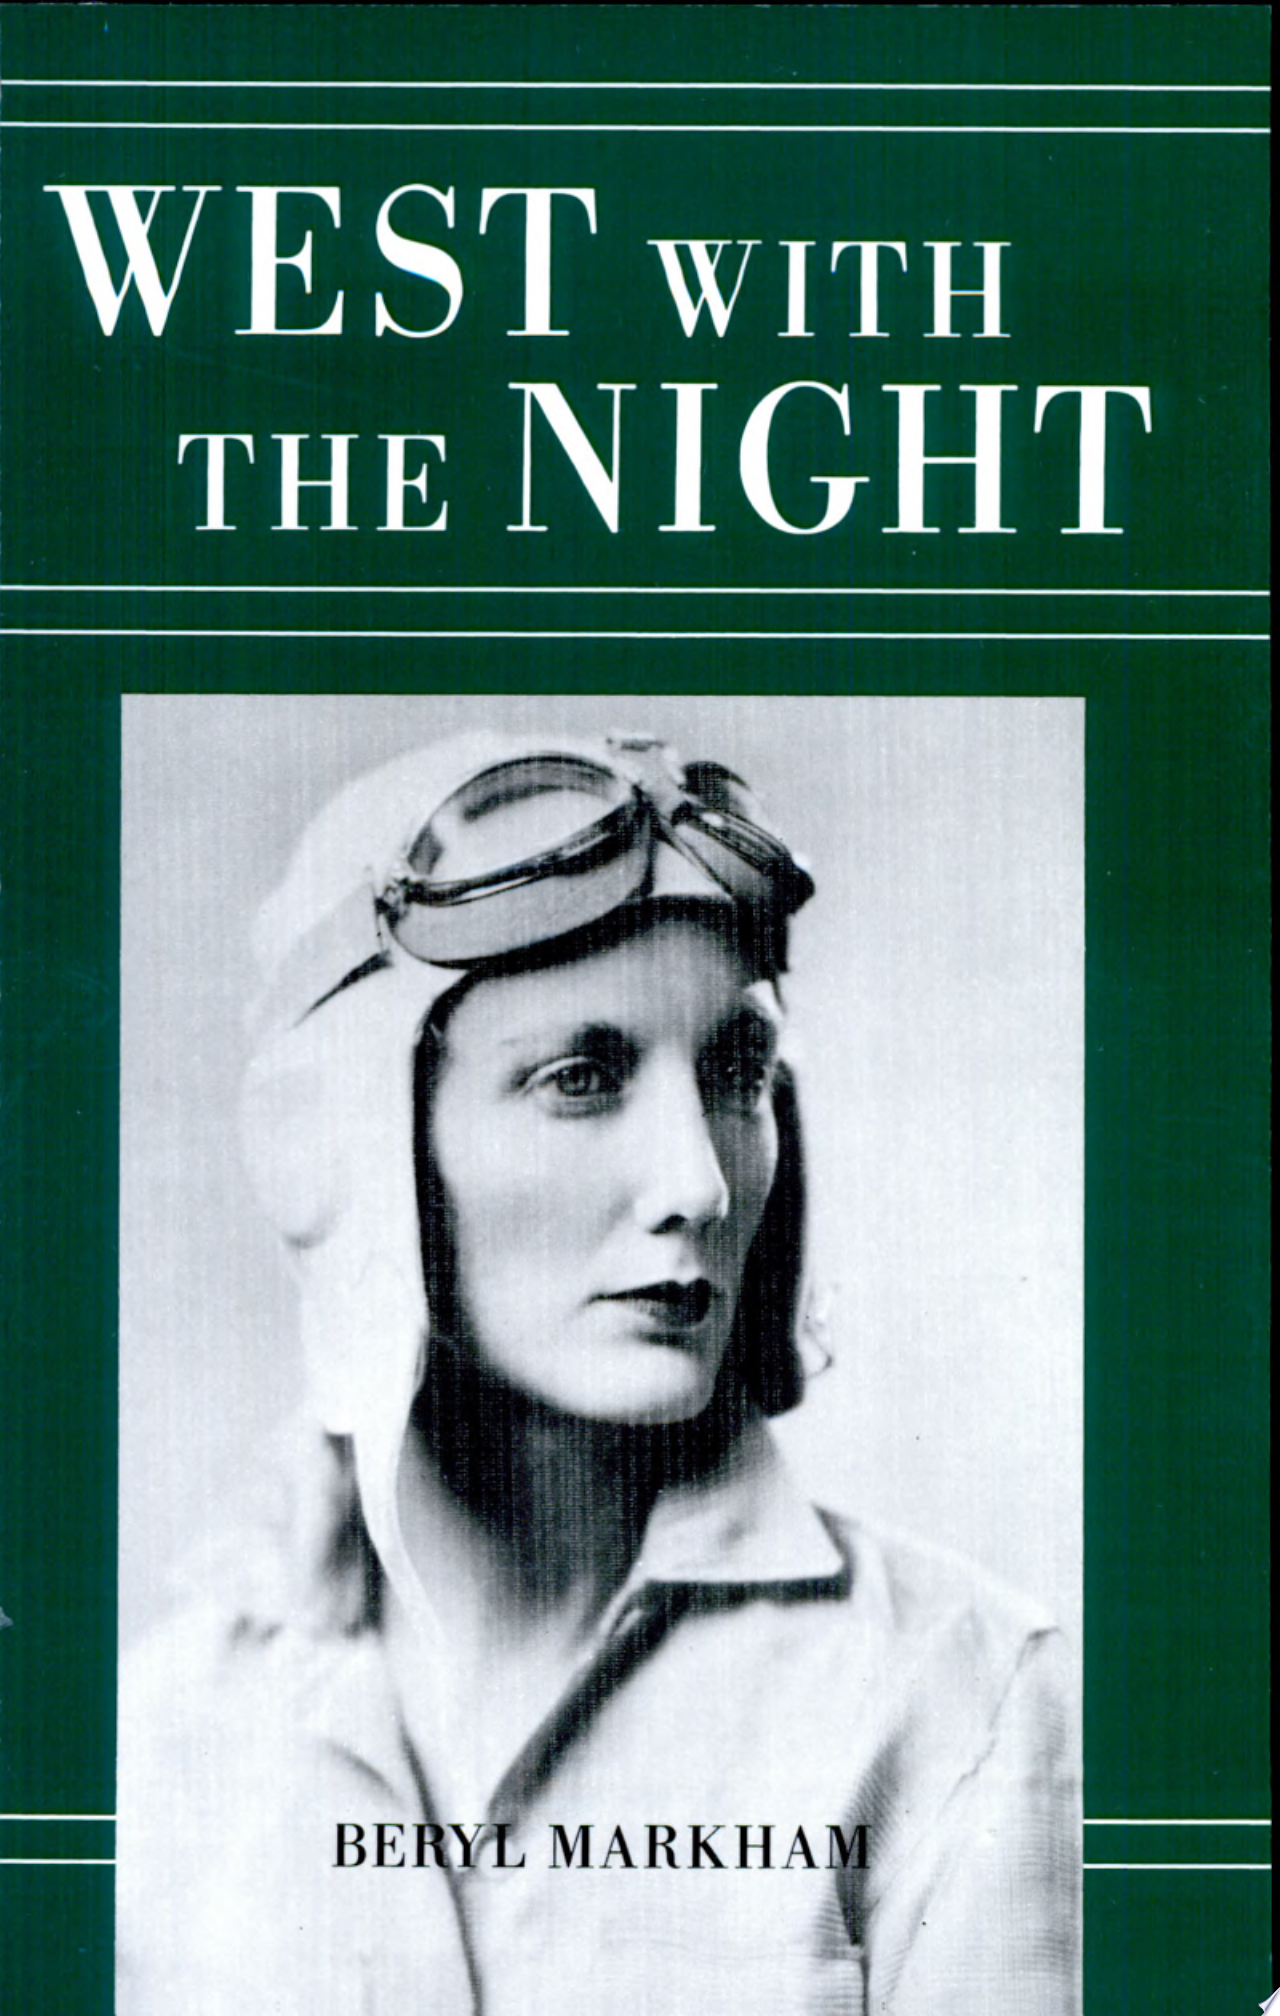 Image for "West with the Night"